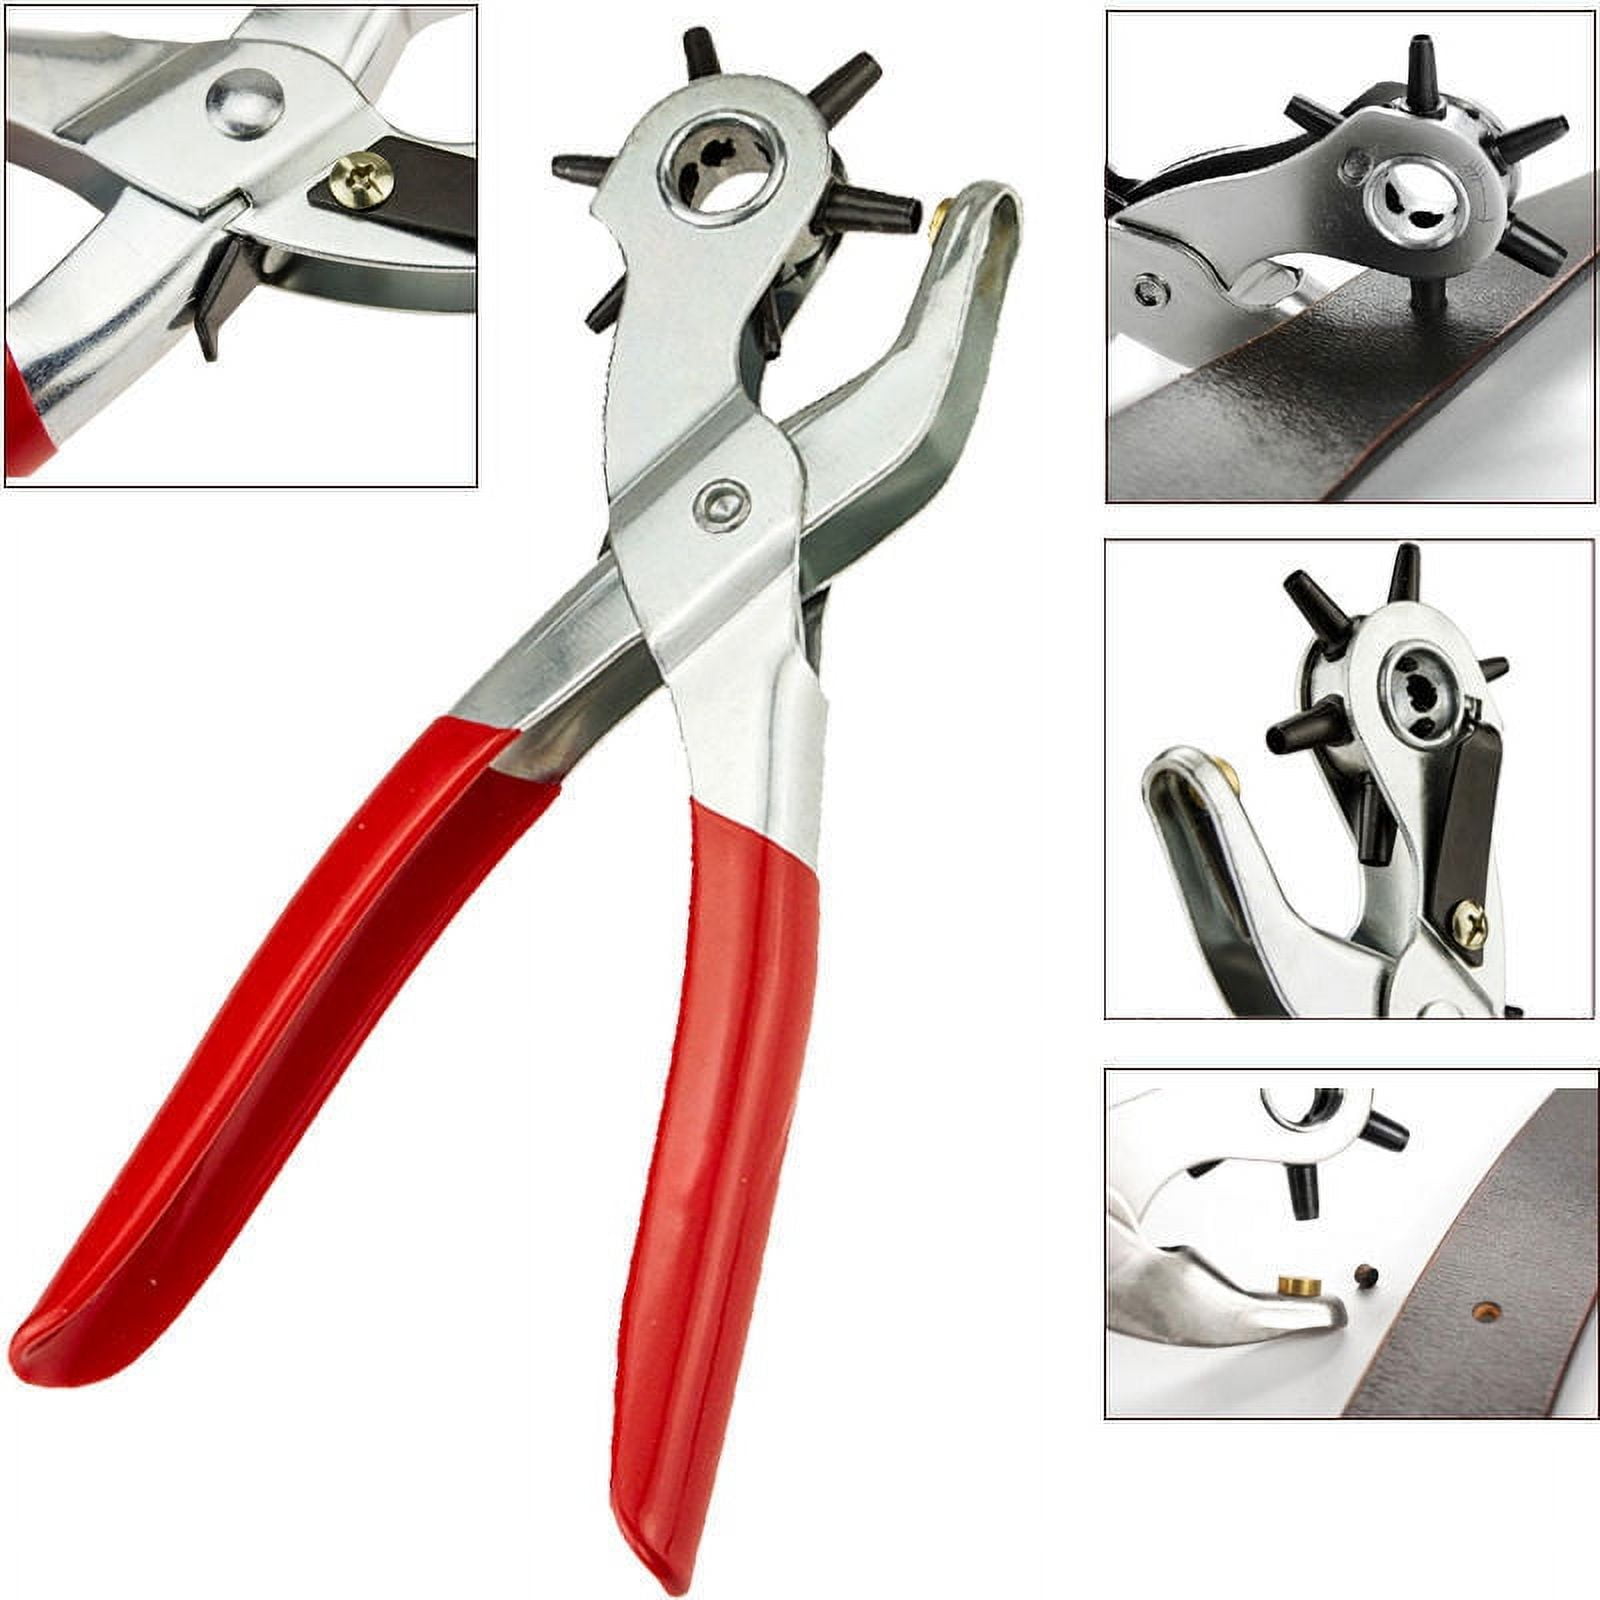 6.25 inch leather punch pliers